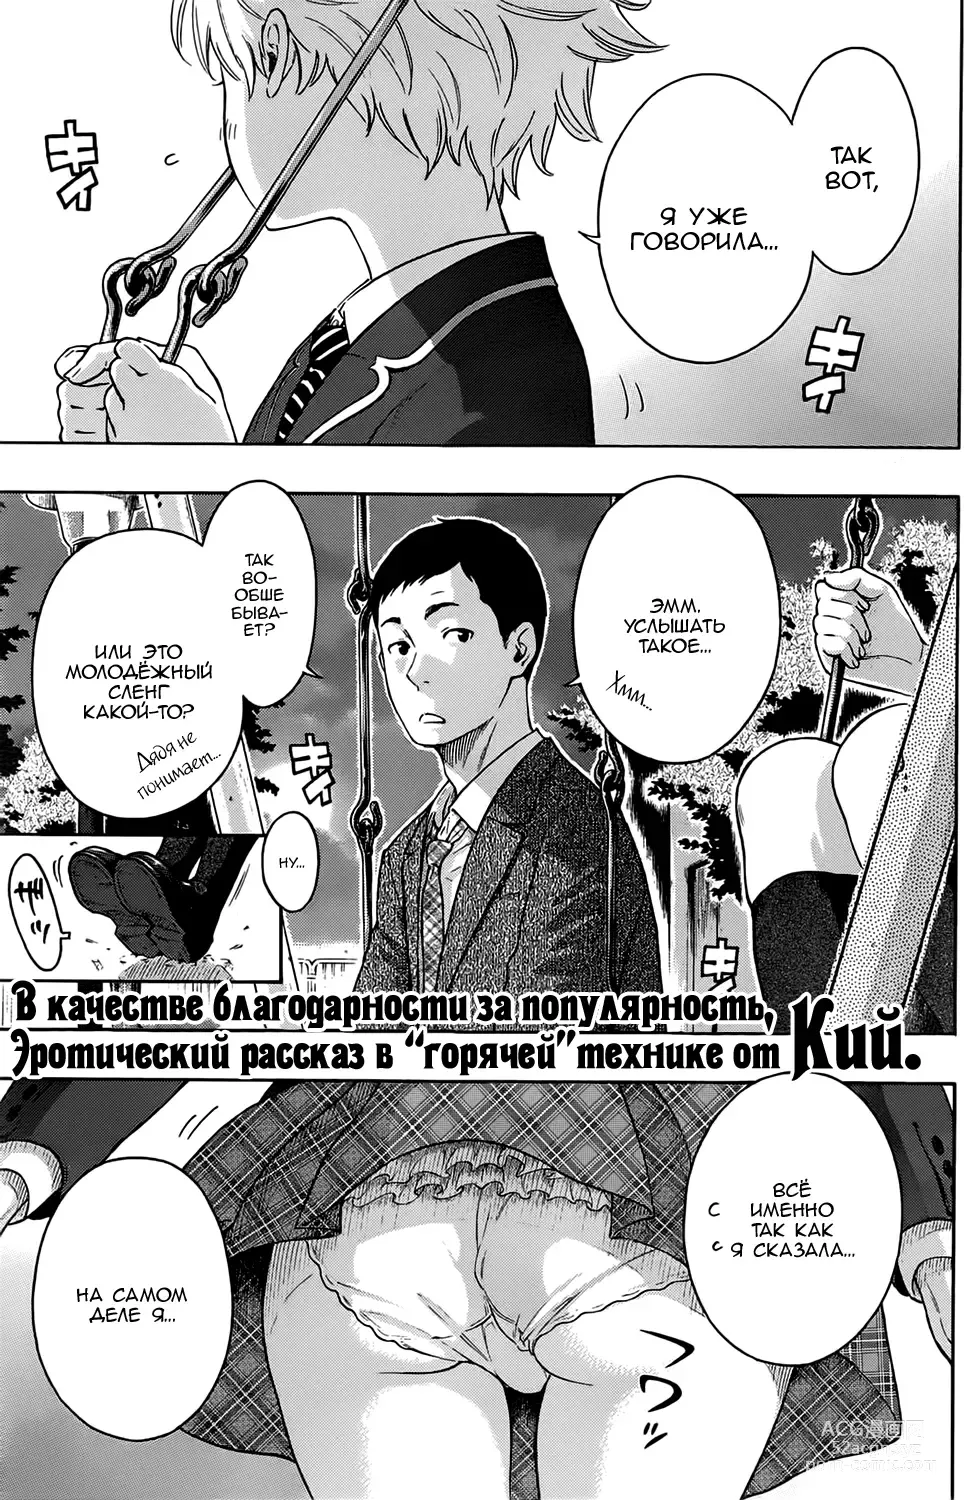 Page 1 of manga Вампир!